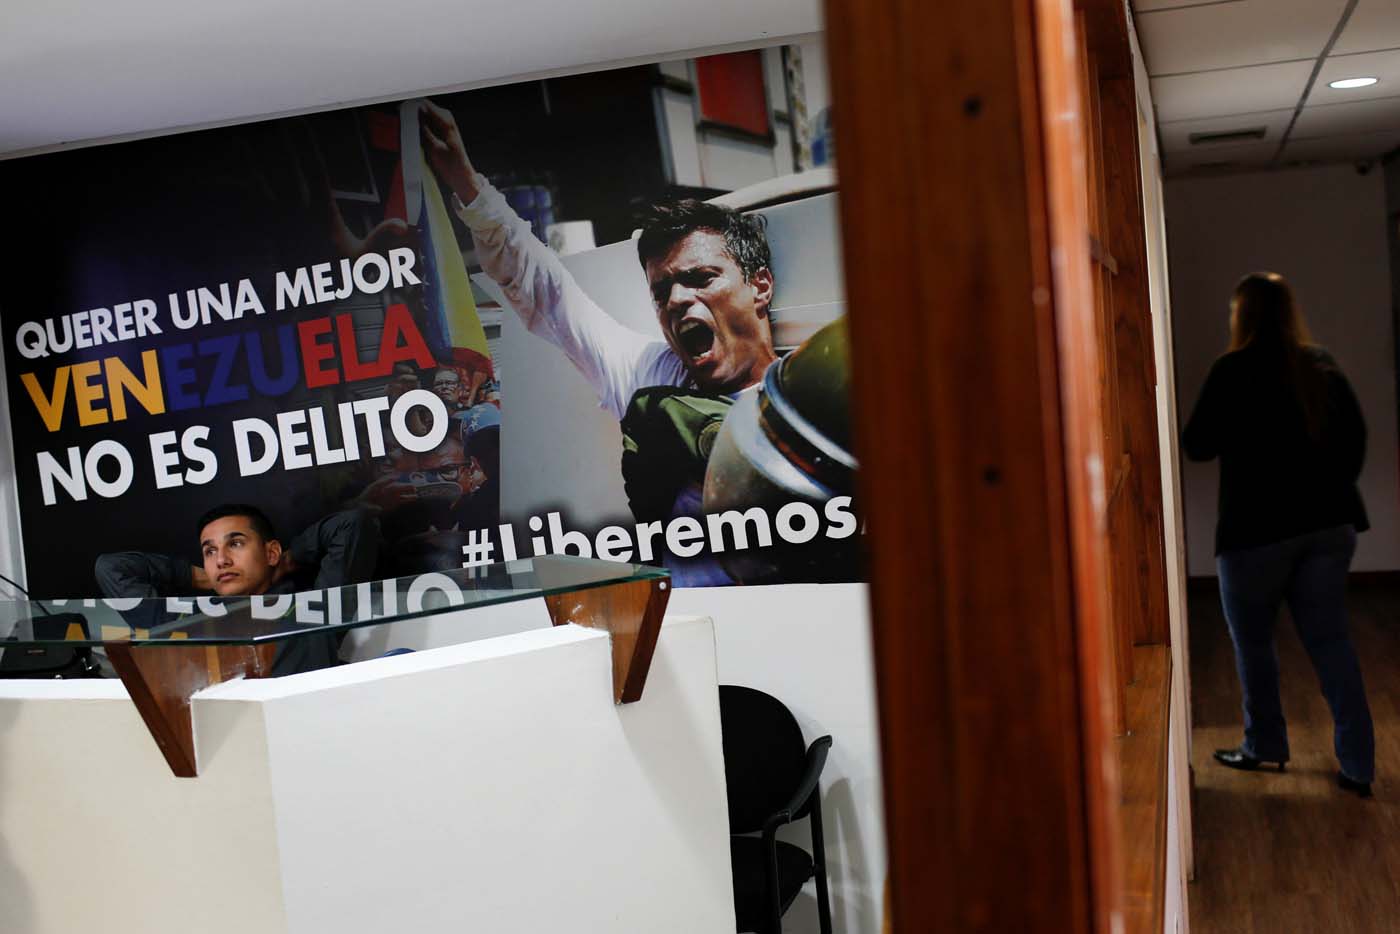 A poster with the image of the jailed opposition leader Leopoldo Lopez that reads, "Wanting a better Venezuela is not a crime", is seen at the office of the party Popular Will (Voluntad Popular) in Caracas, Venezuela January 18, 2017. Picture taken January 18, 2017. REUTERS/Carlos Garcia Rawlins